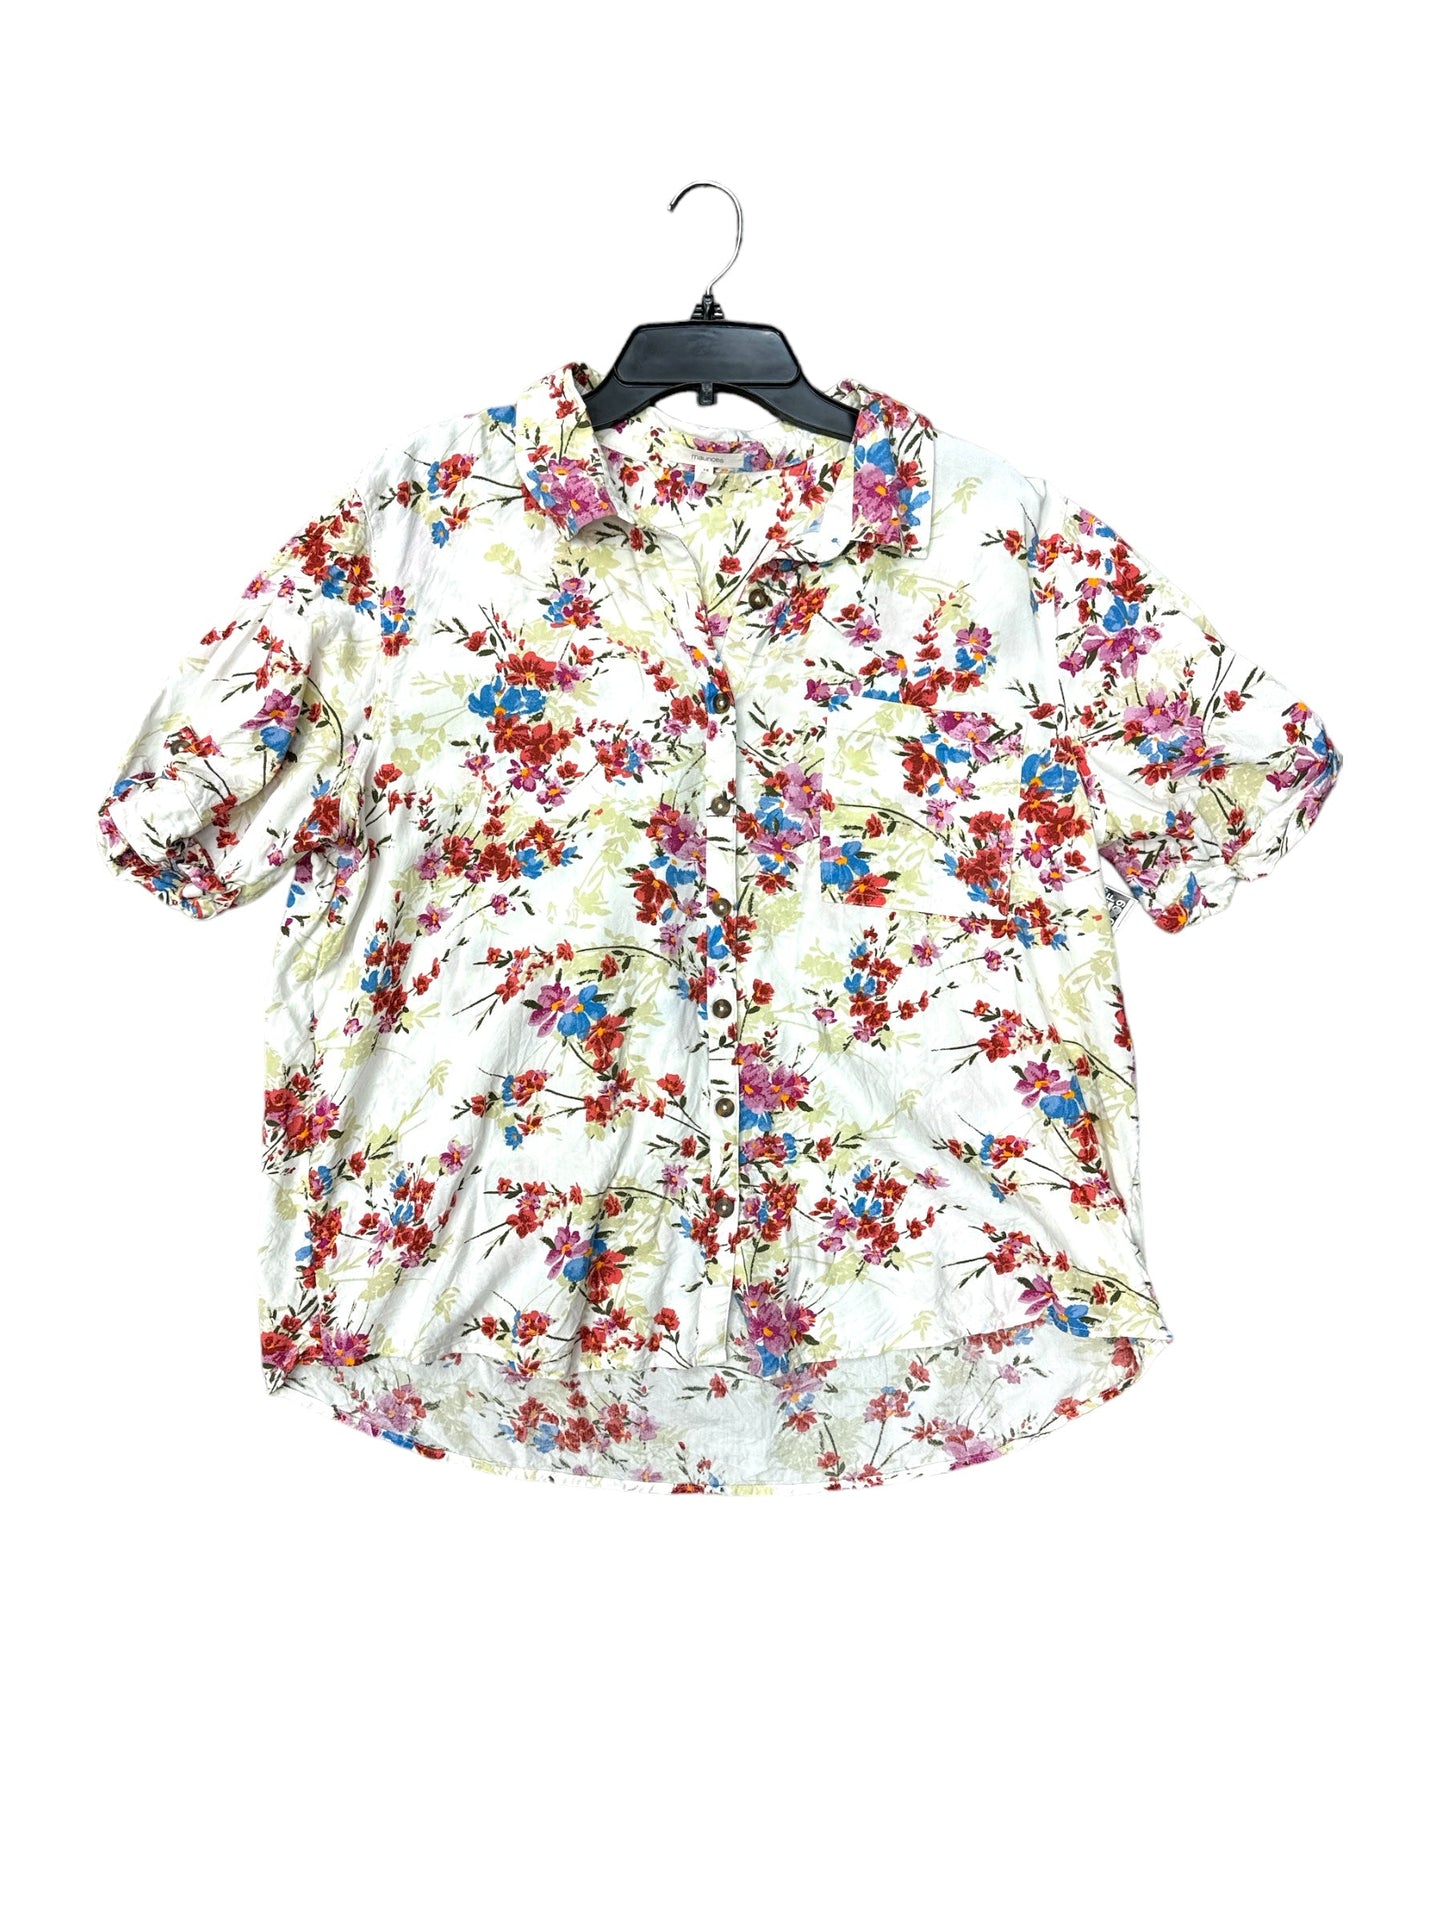 Floral Print Top Short Sleeve Maurices, Size 2x